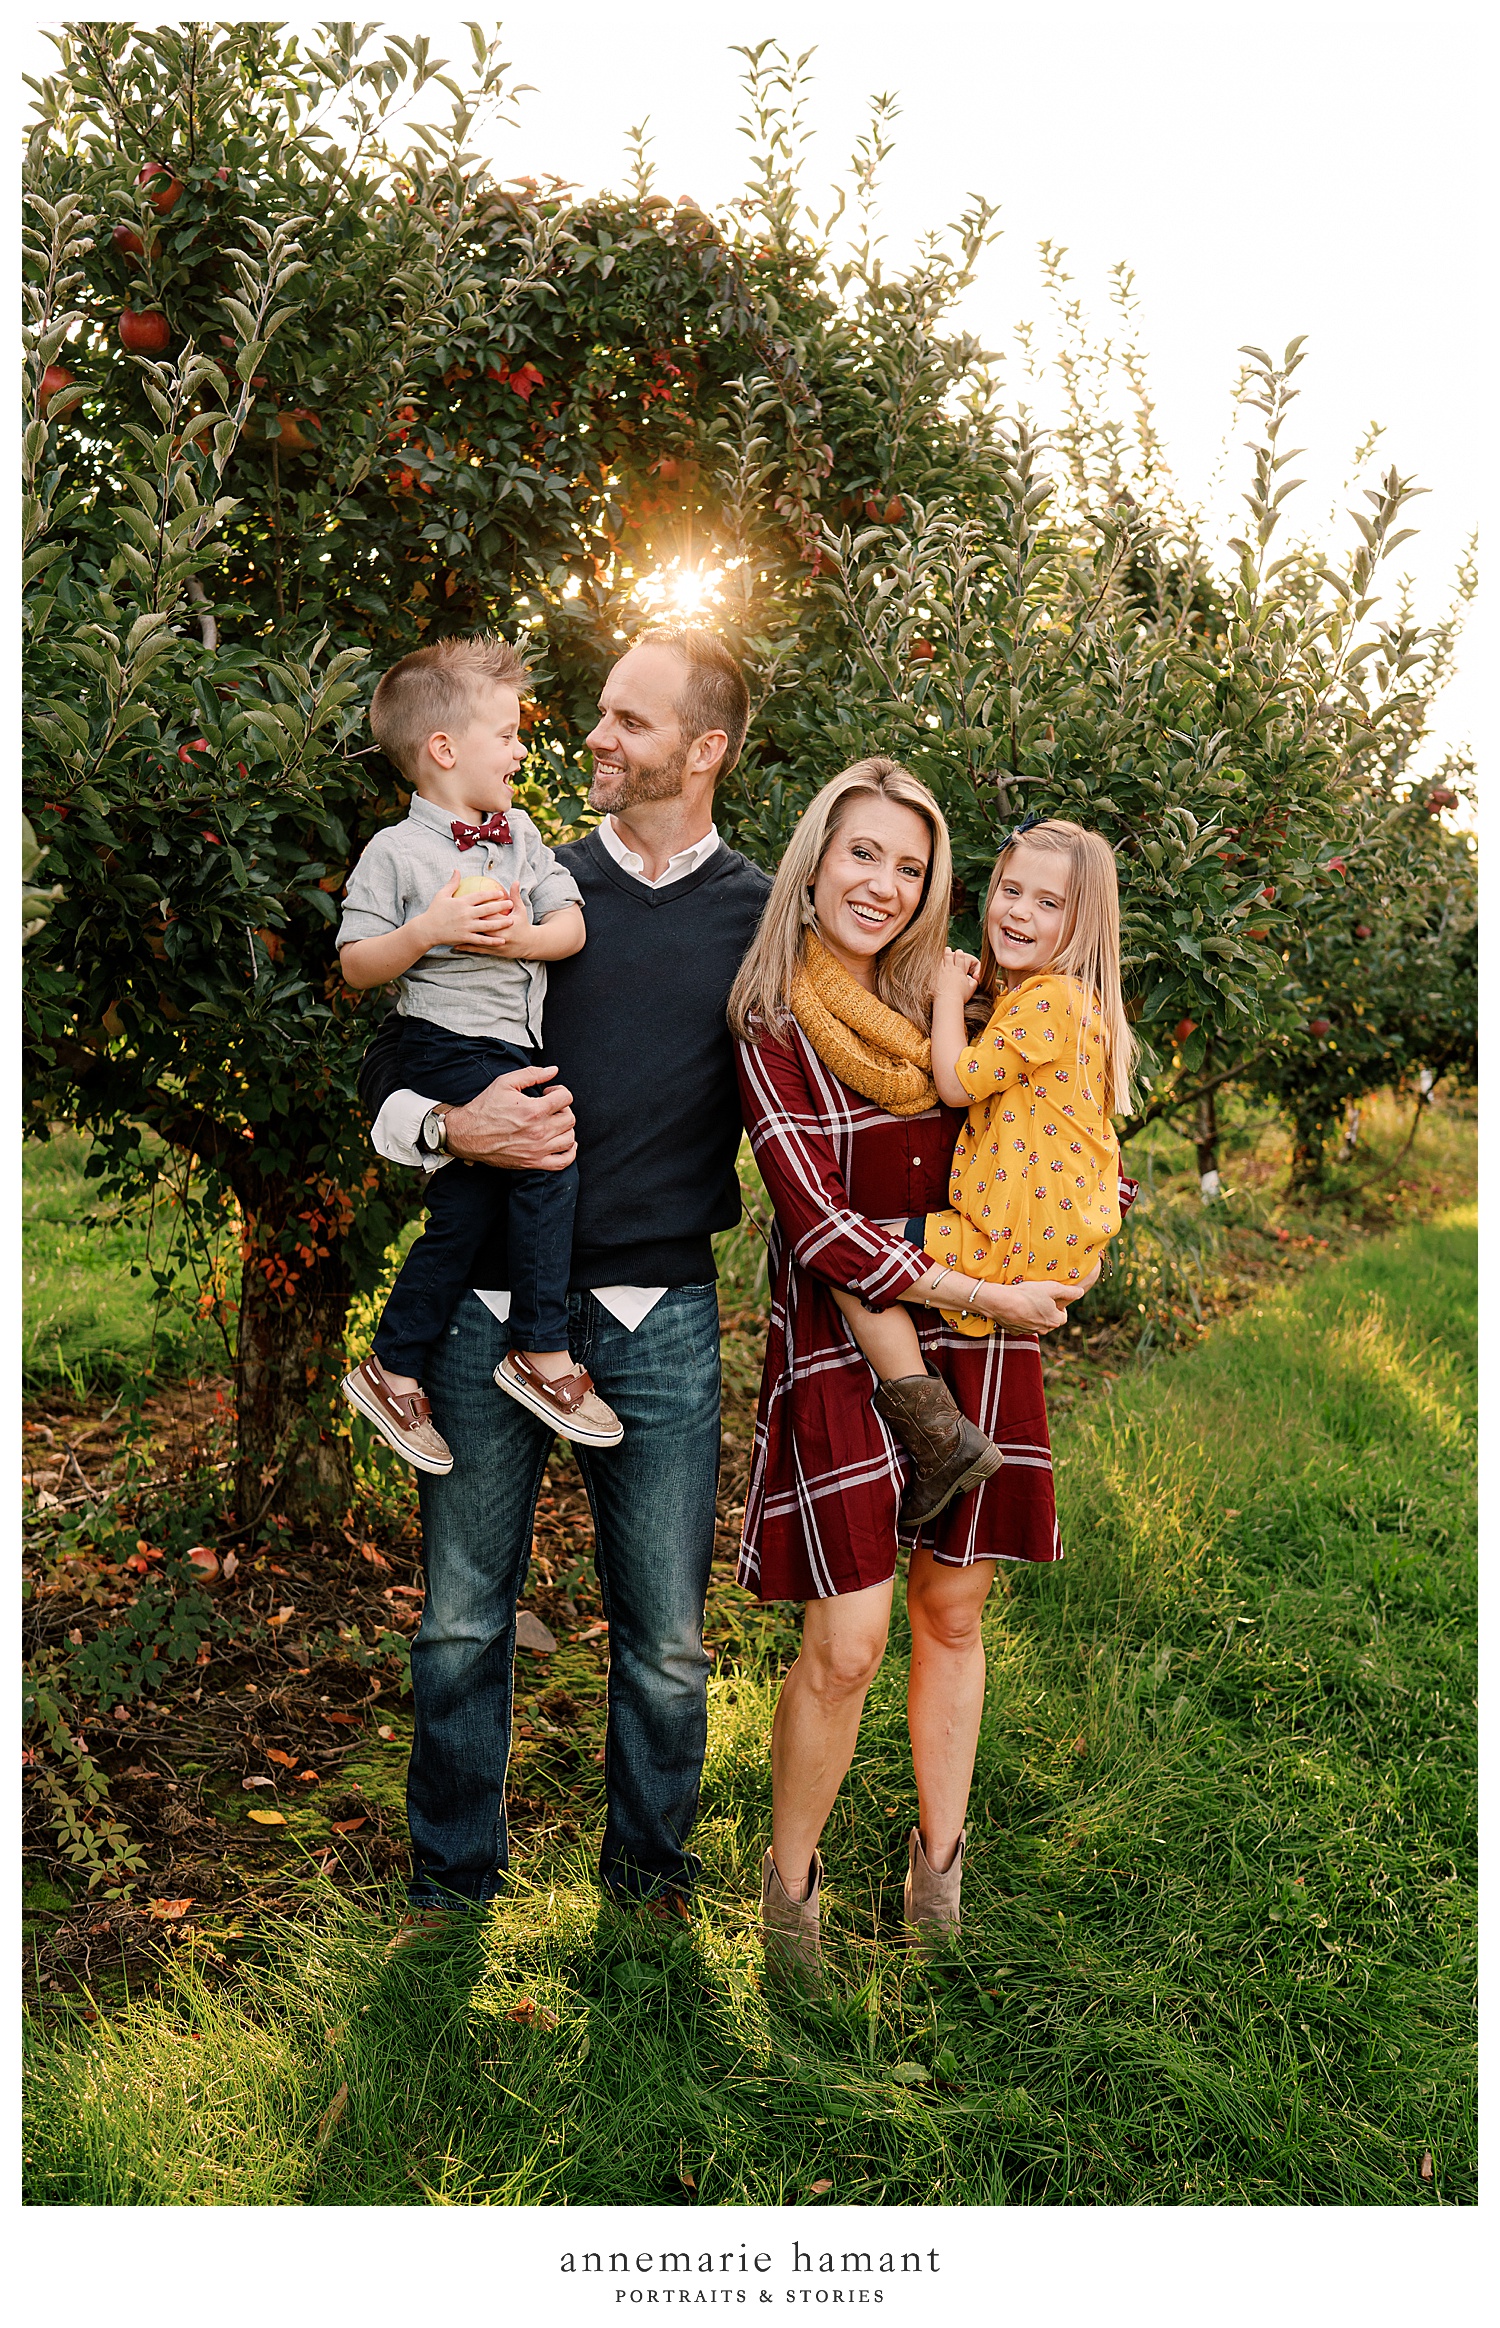  Fall family photos in an apple orchard in Lehigh Valley PA.  The orchard is fun and gets gorgeous sunset light and makes for the perfect fall backdrop.  